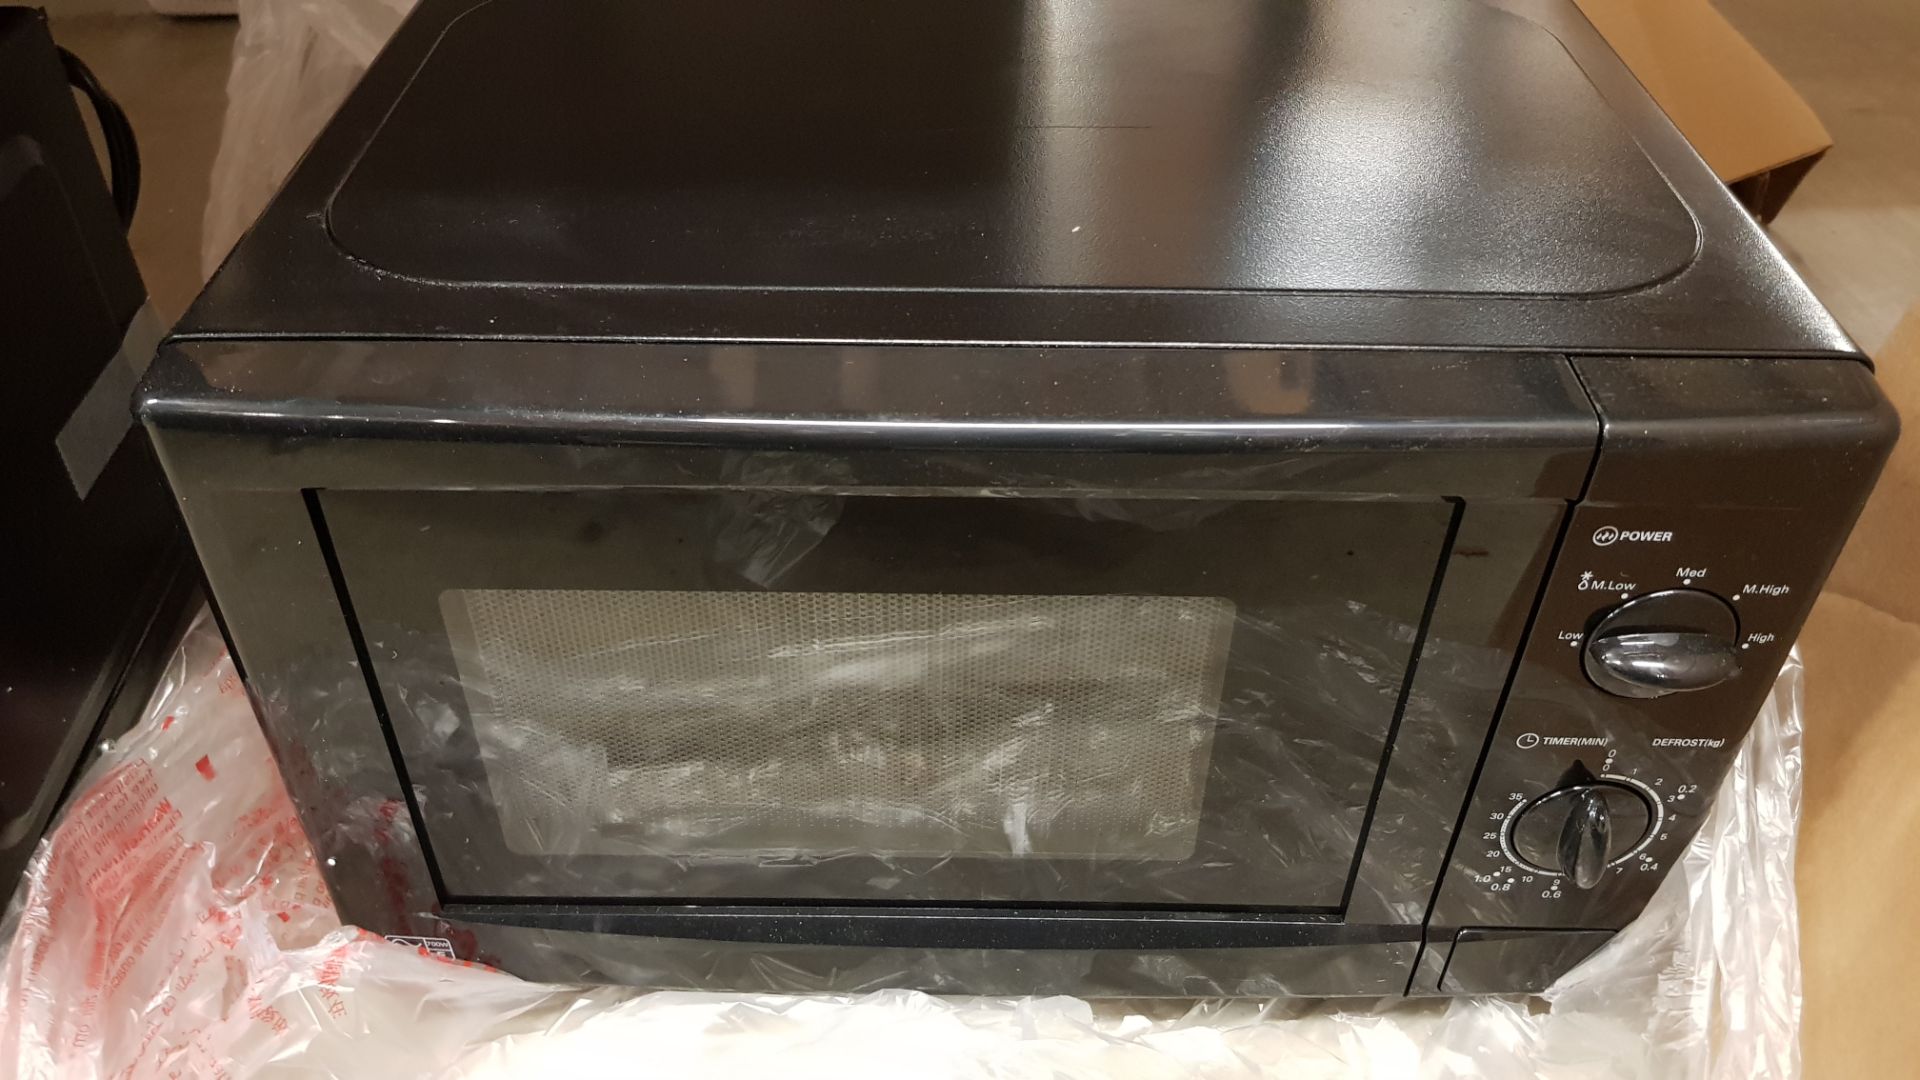 2x Microwave Oven Black 700W 17L (GMM001NB-18) RRP £60 Each. (Spares Or Repairs). - Image 6 of 8